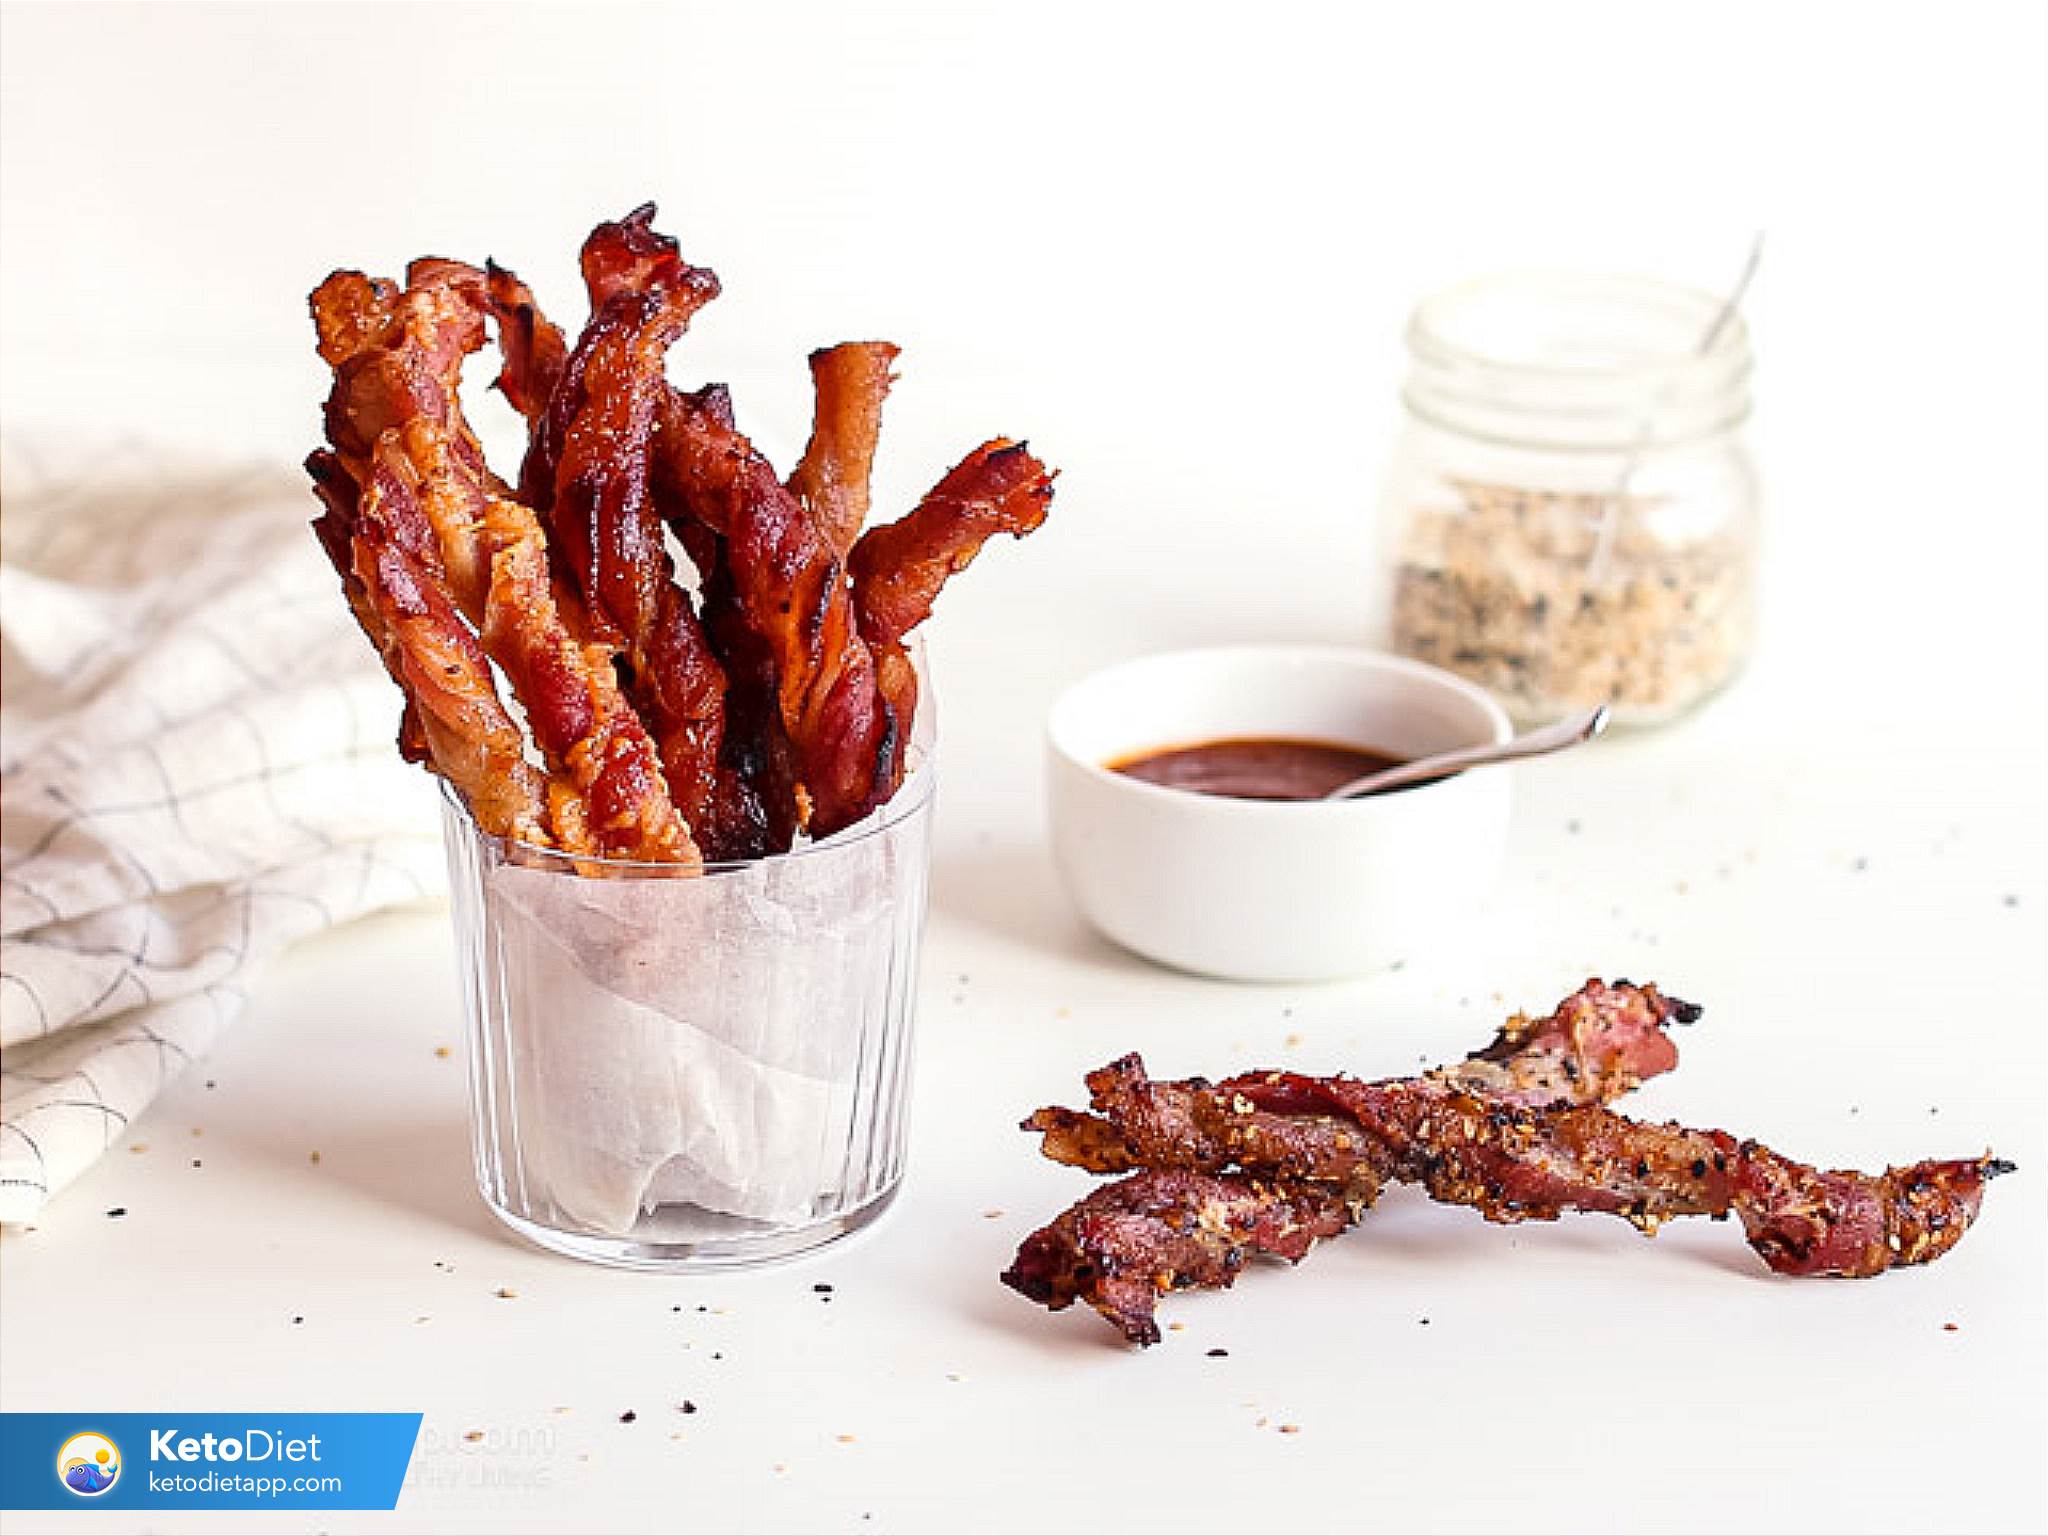 The Best Bacon for Keto + Amazing Recipes